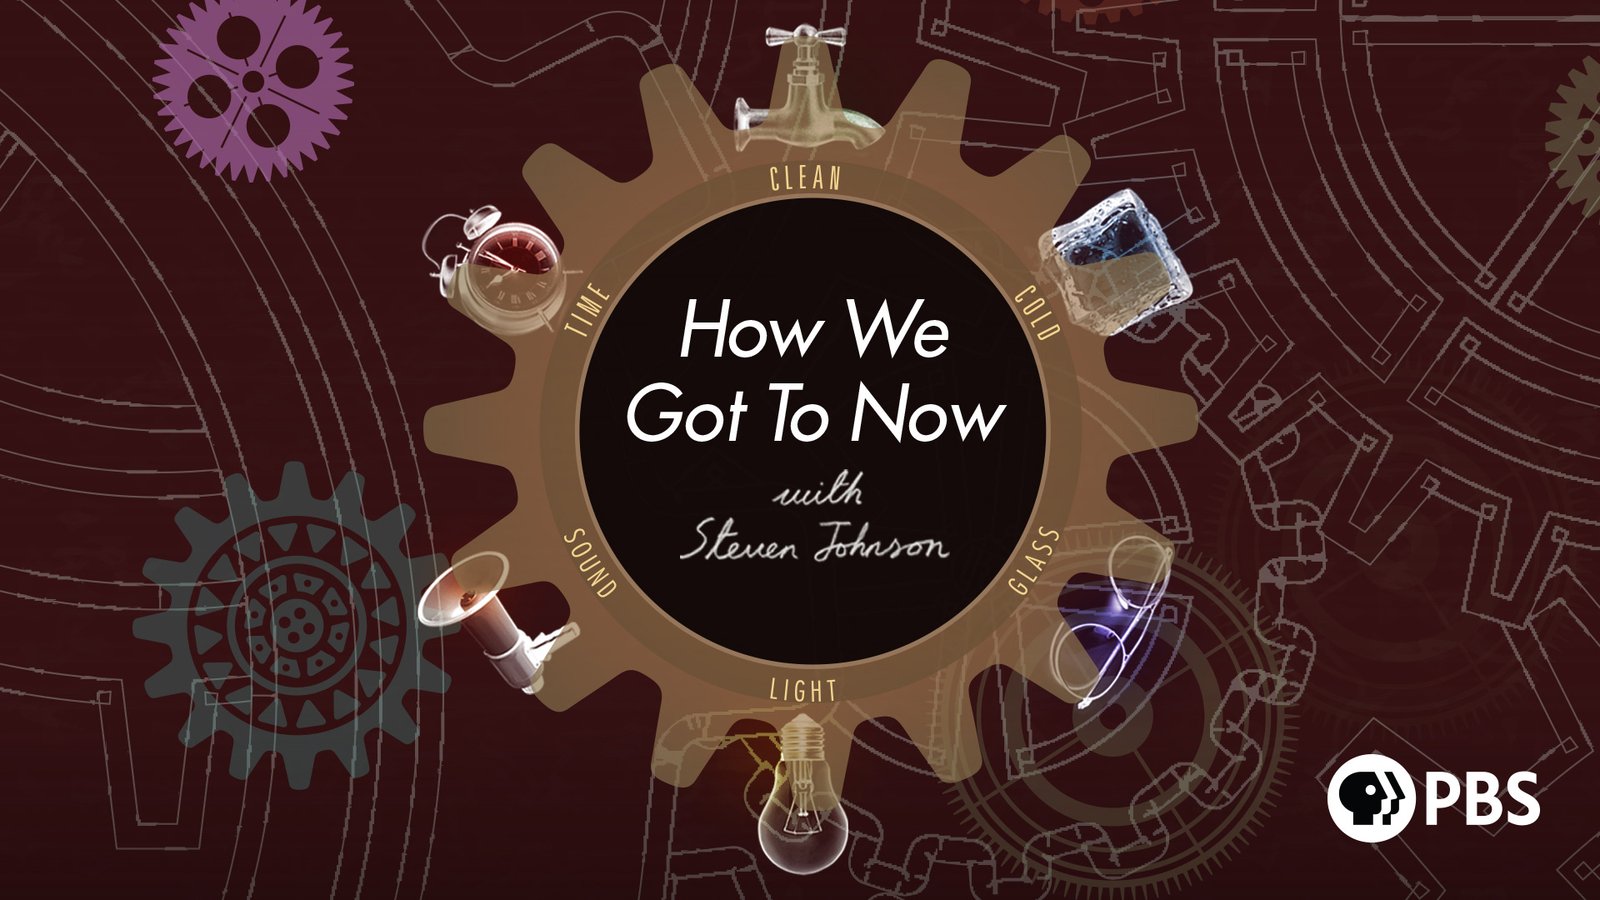 How We Got to Now - with Steven Johnson